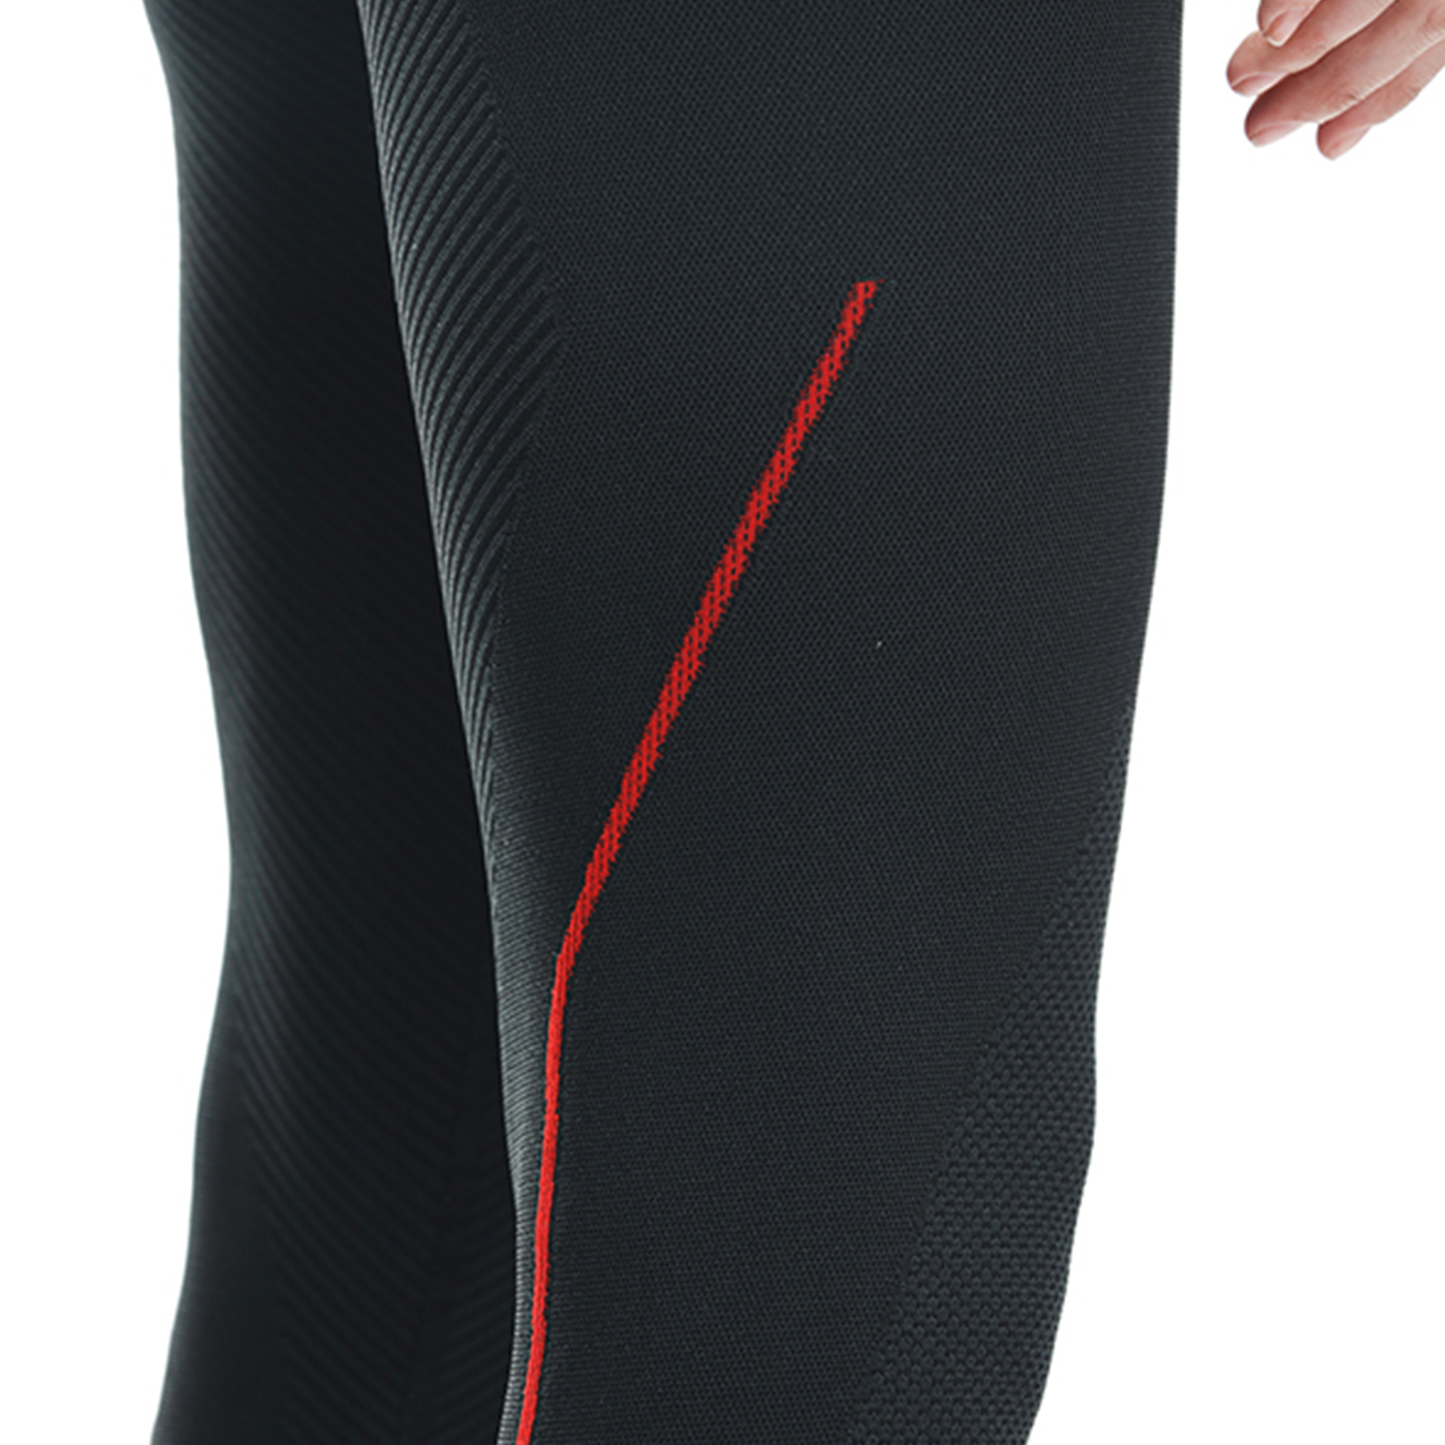 Dainese Thermo Pants Lady - Black/Red (606)